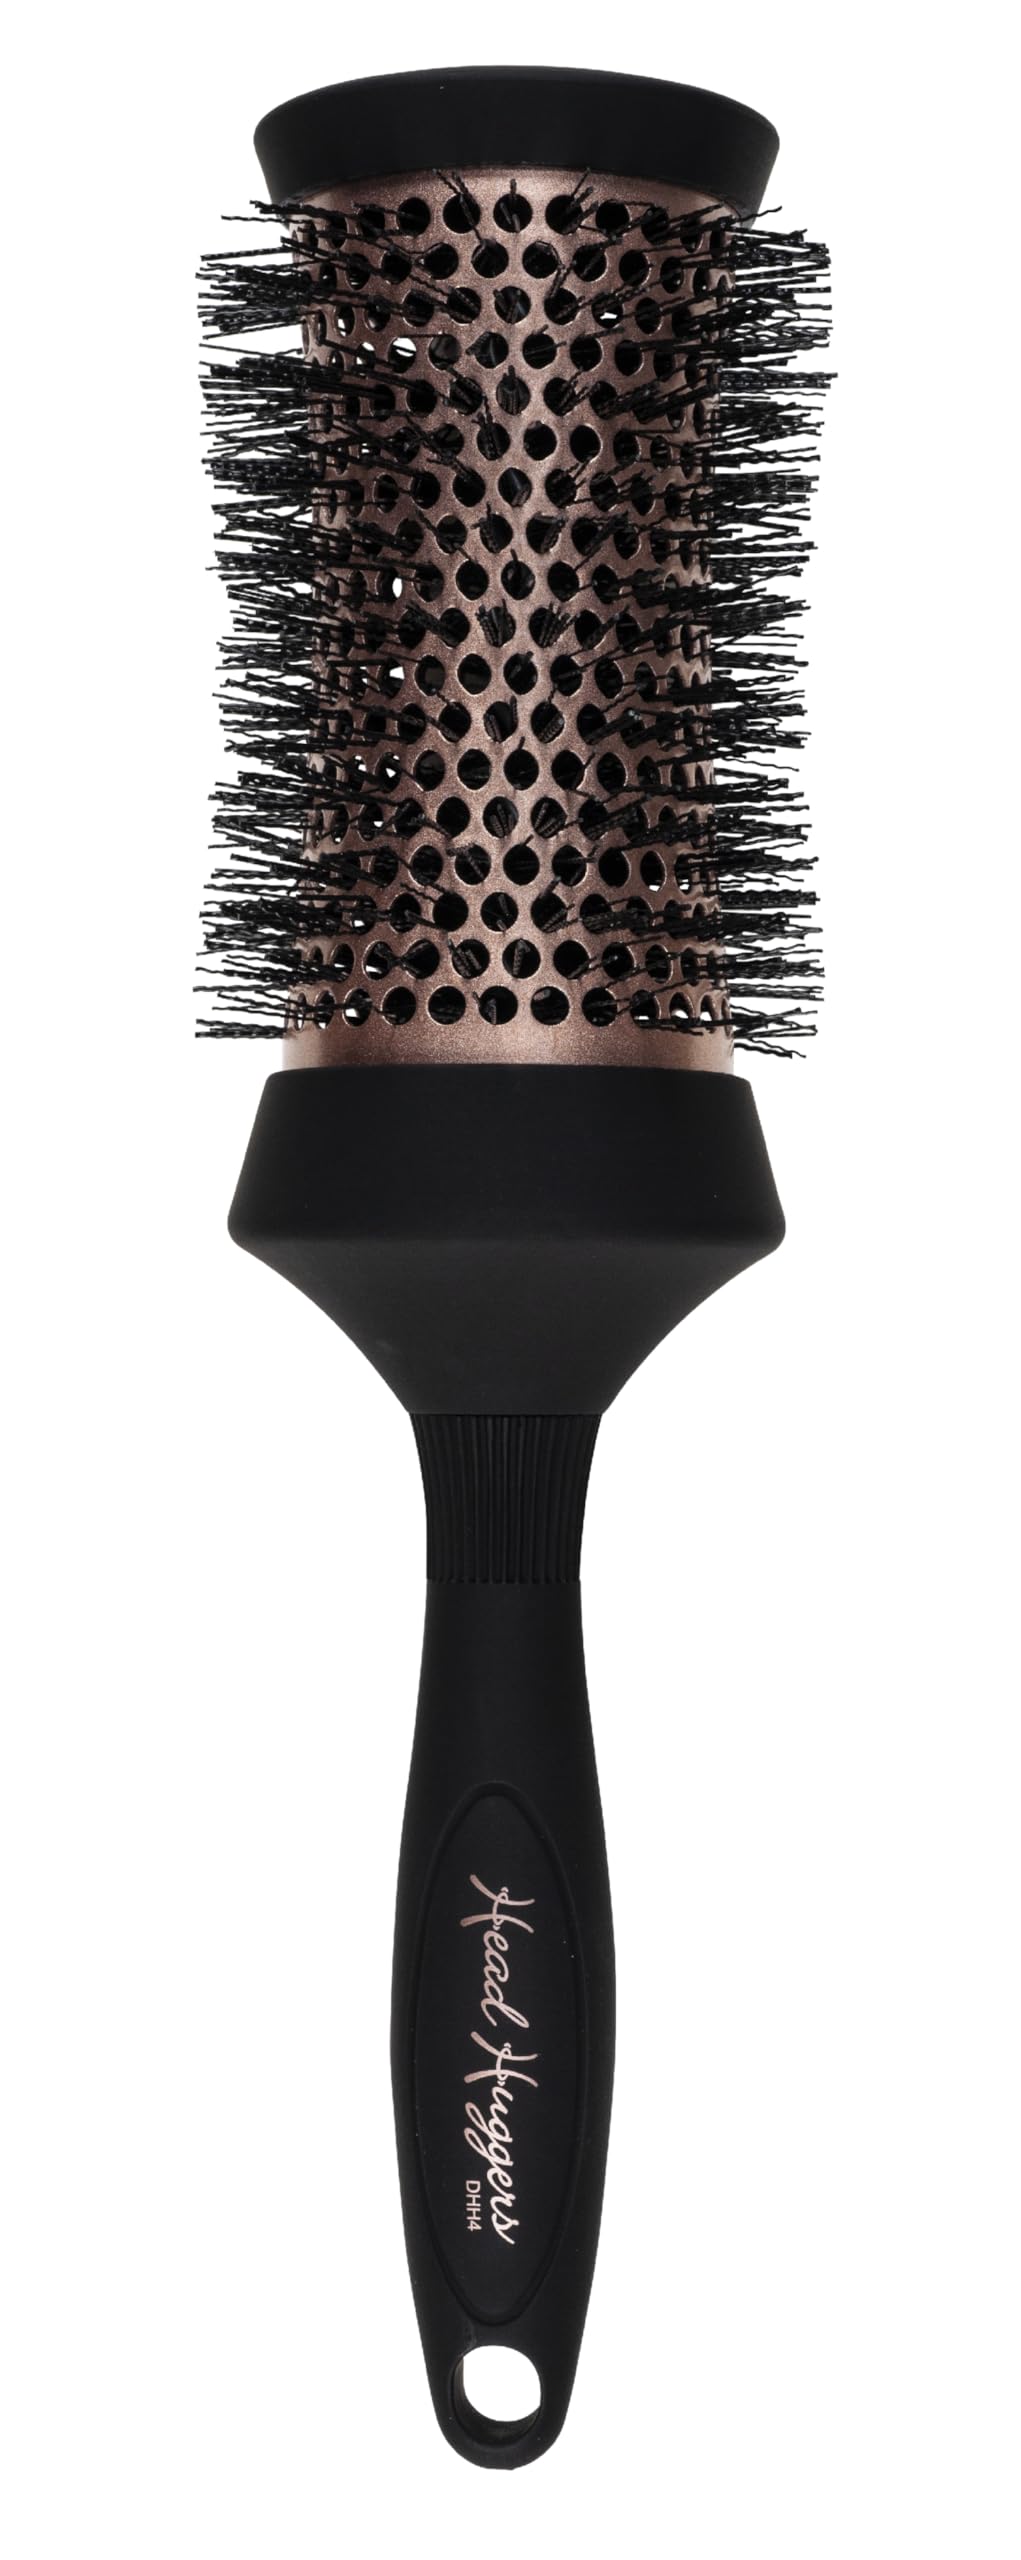 Denman Thermo Ceramic Hourglass Hot Curl Brush - Hair Curling Brush for Blow-Drying, Straightening, Defined Curls, Volume & Root-Lift - Rose Gold & Black